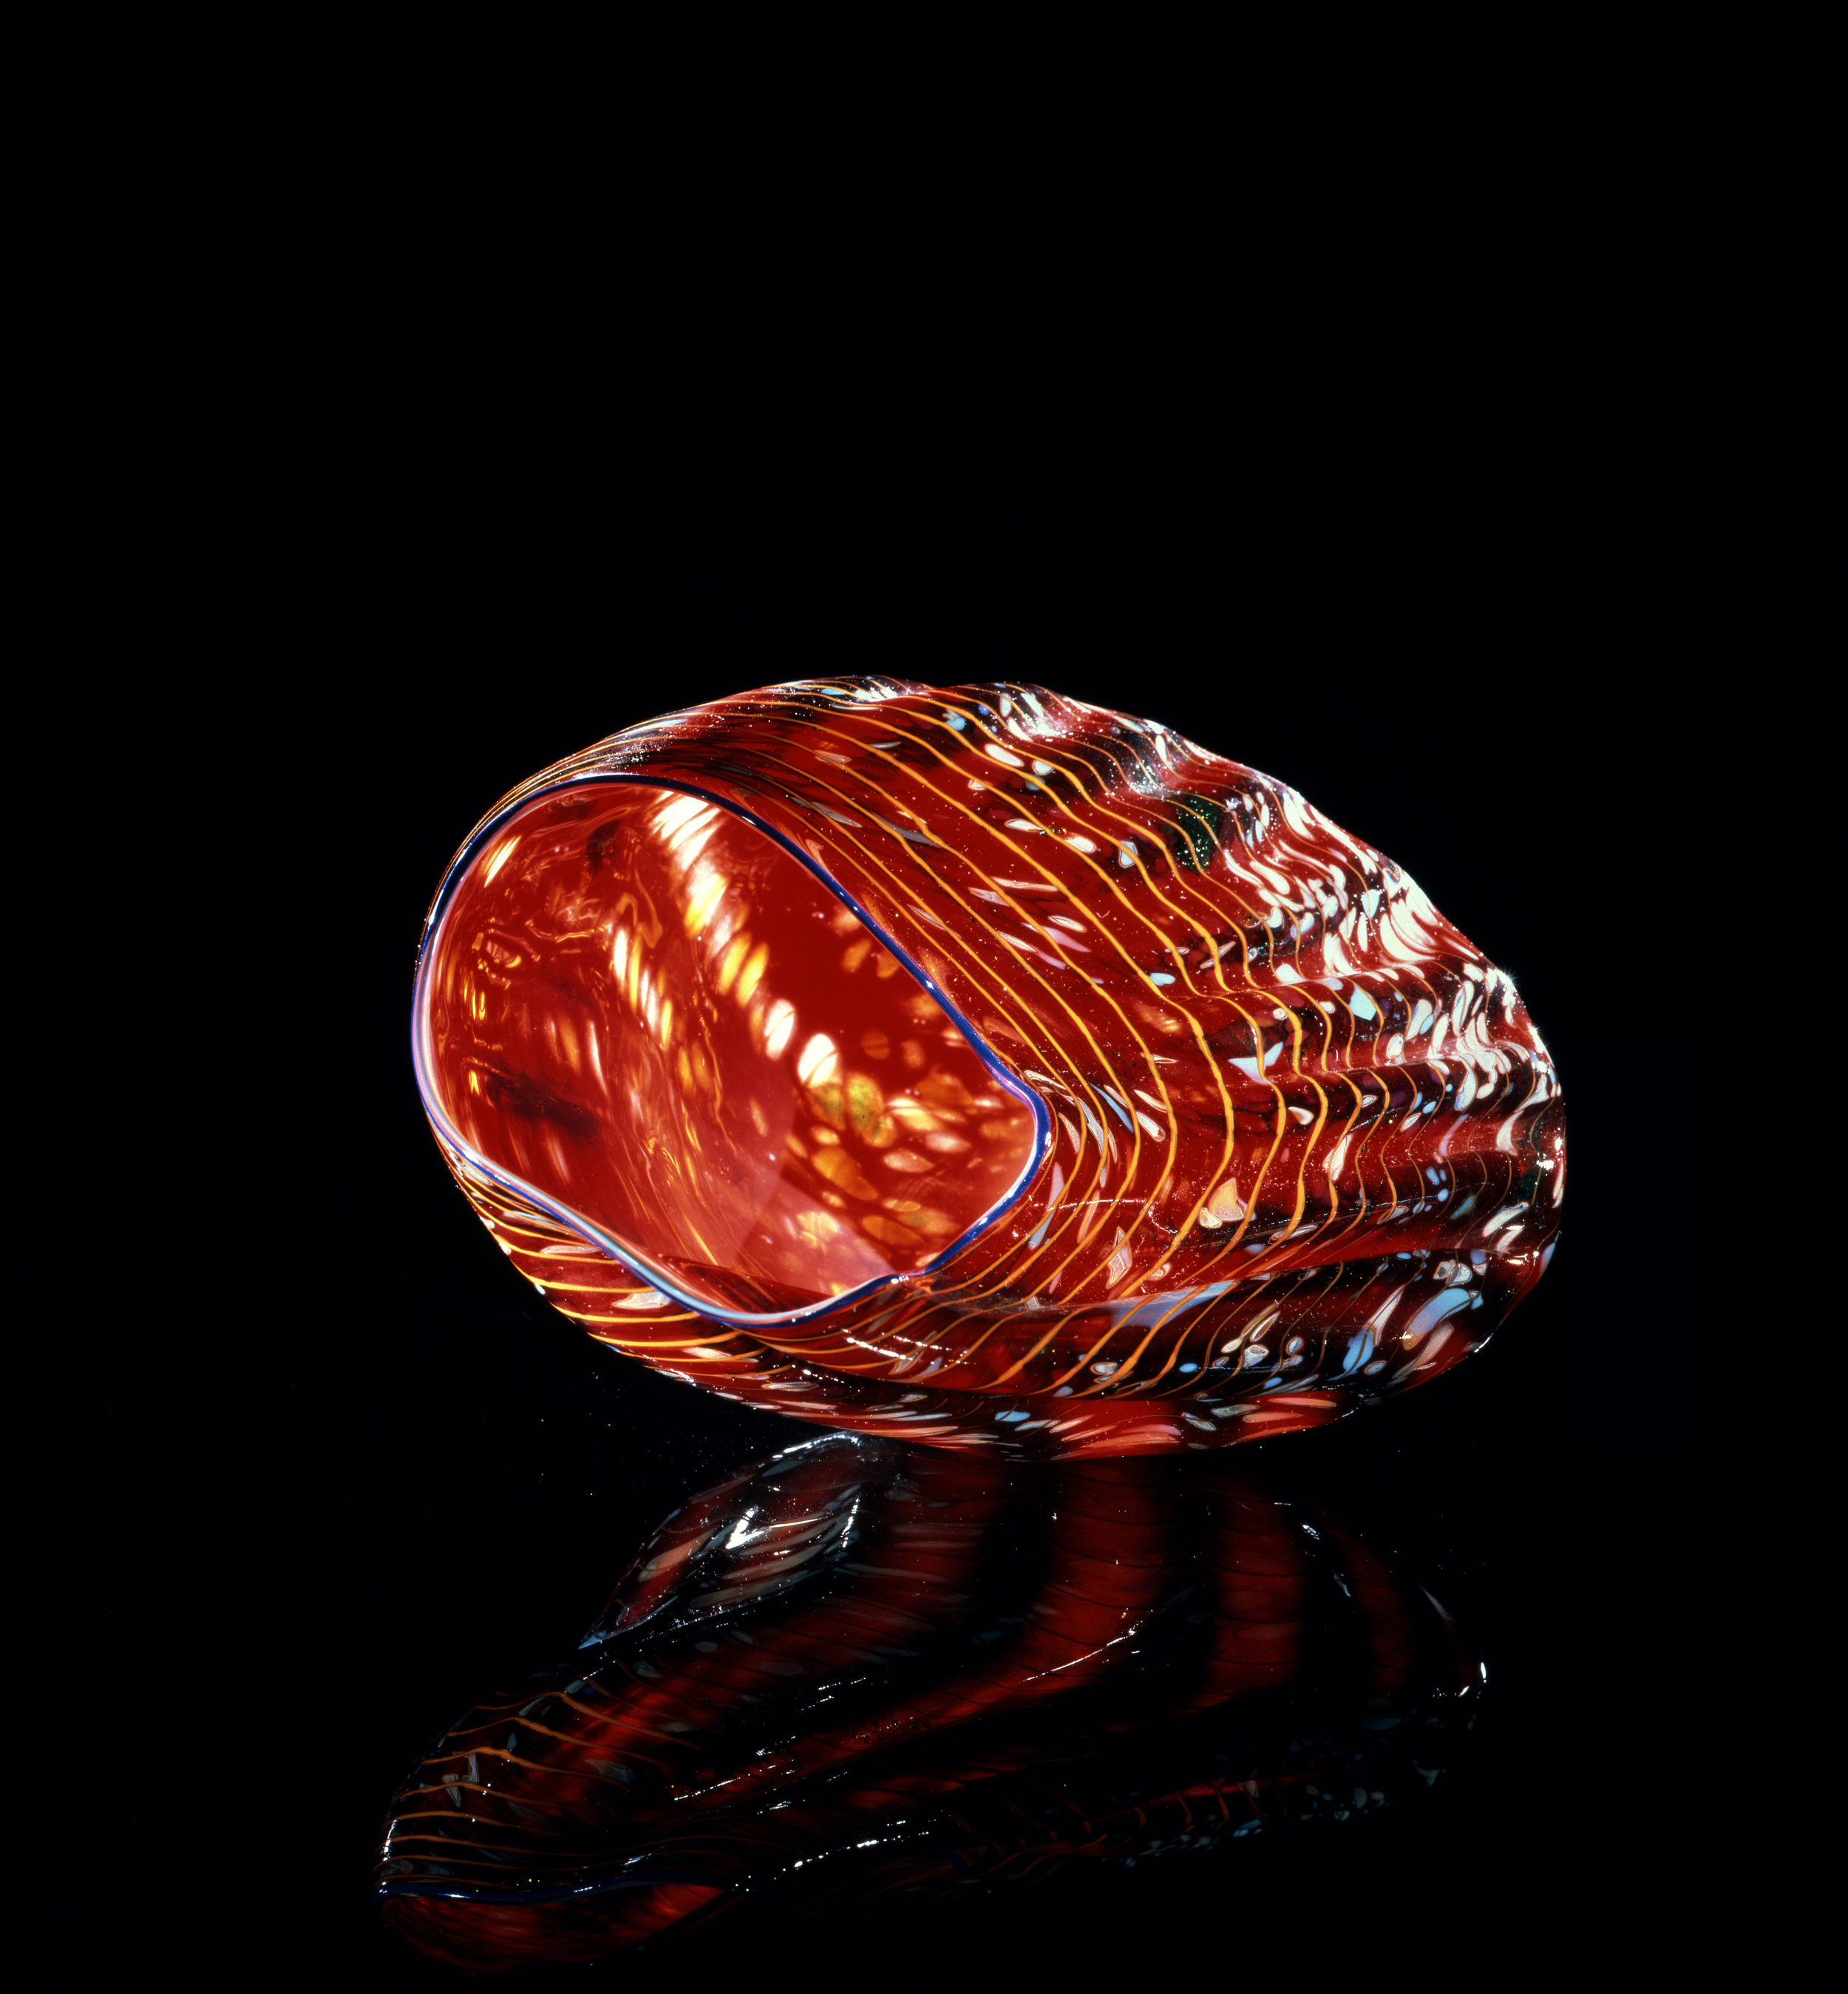  Dale Chihuly,&nbsp; Araby Red Macchia with Ultramarine Lip Wrap&nbsp; (1983, glass, 4 x 9 x 7 inches), DC.74 